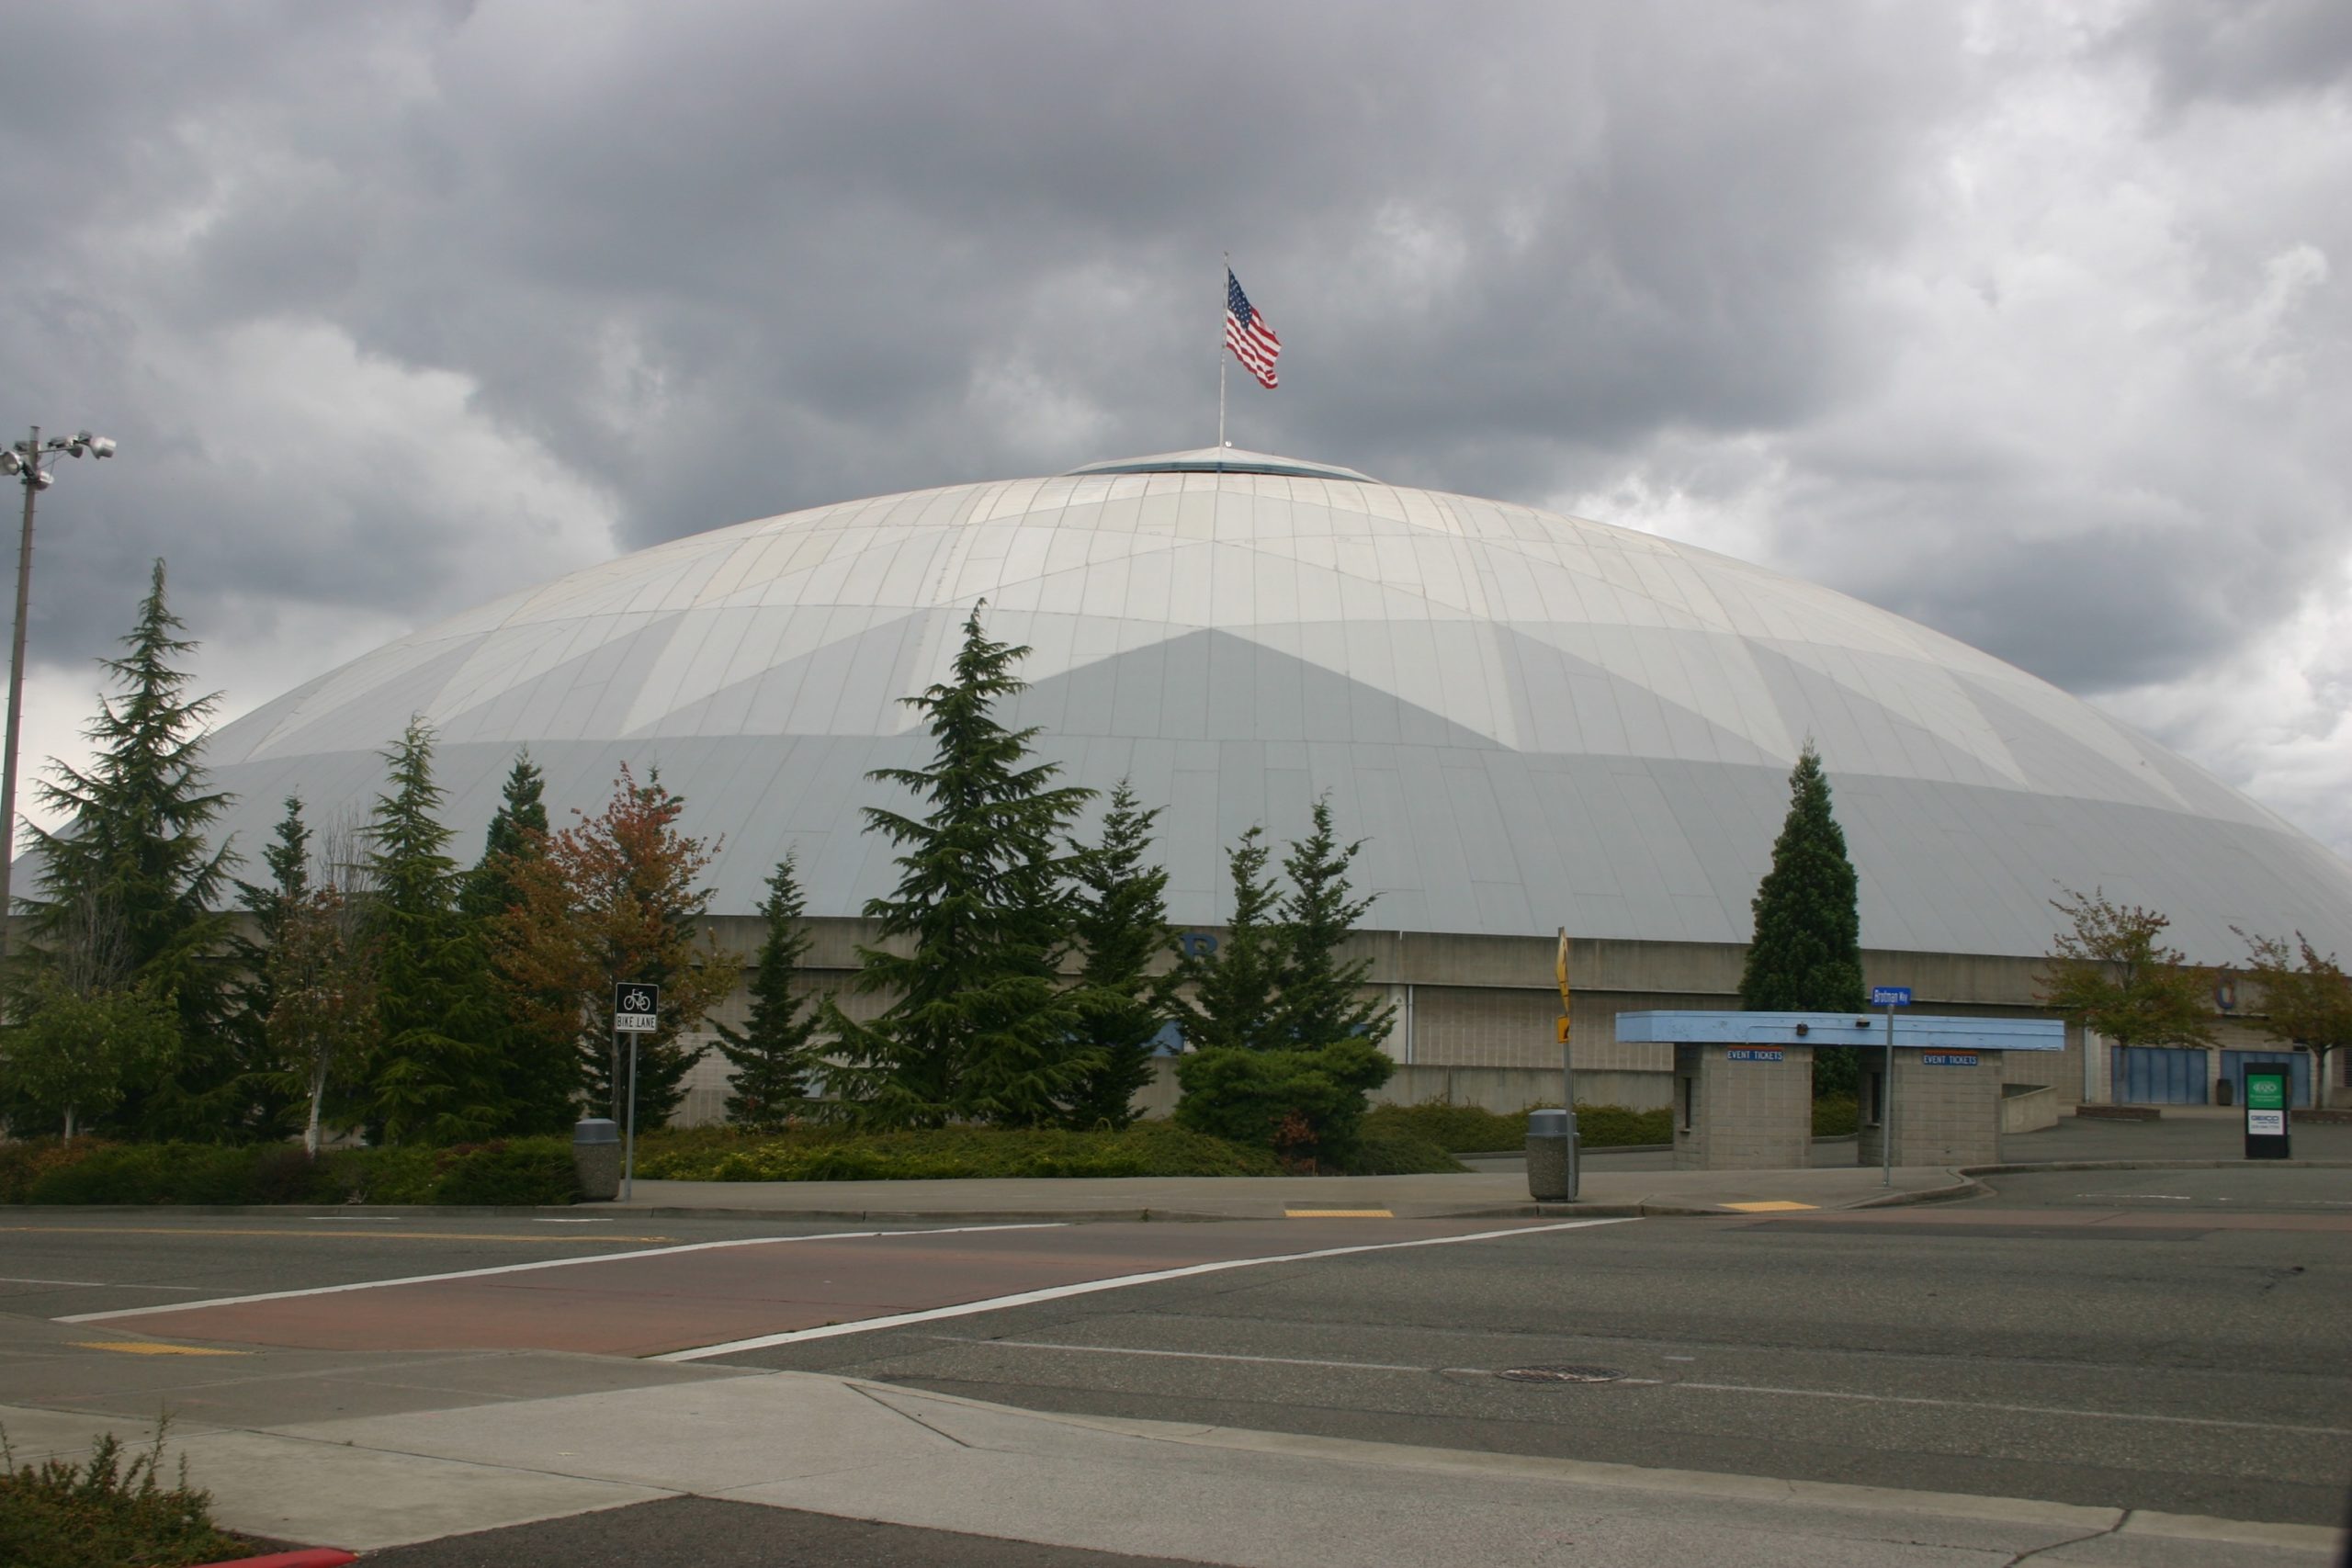 Credit: David Guest / TDIThe city-owned Tacoma Dome, which opened in 1983, is scheduled to undergo $21.3 million in renovations after the Tacoma City Council approved funding for the project that will begin in summer 2017.